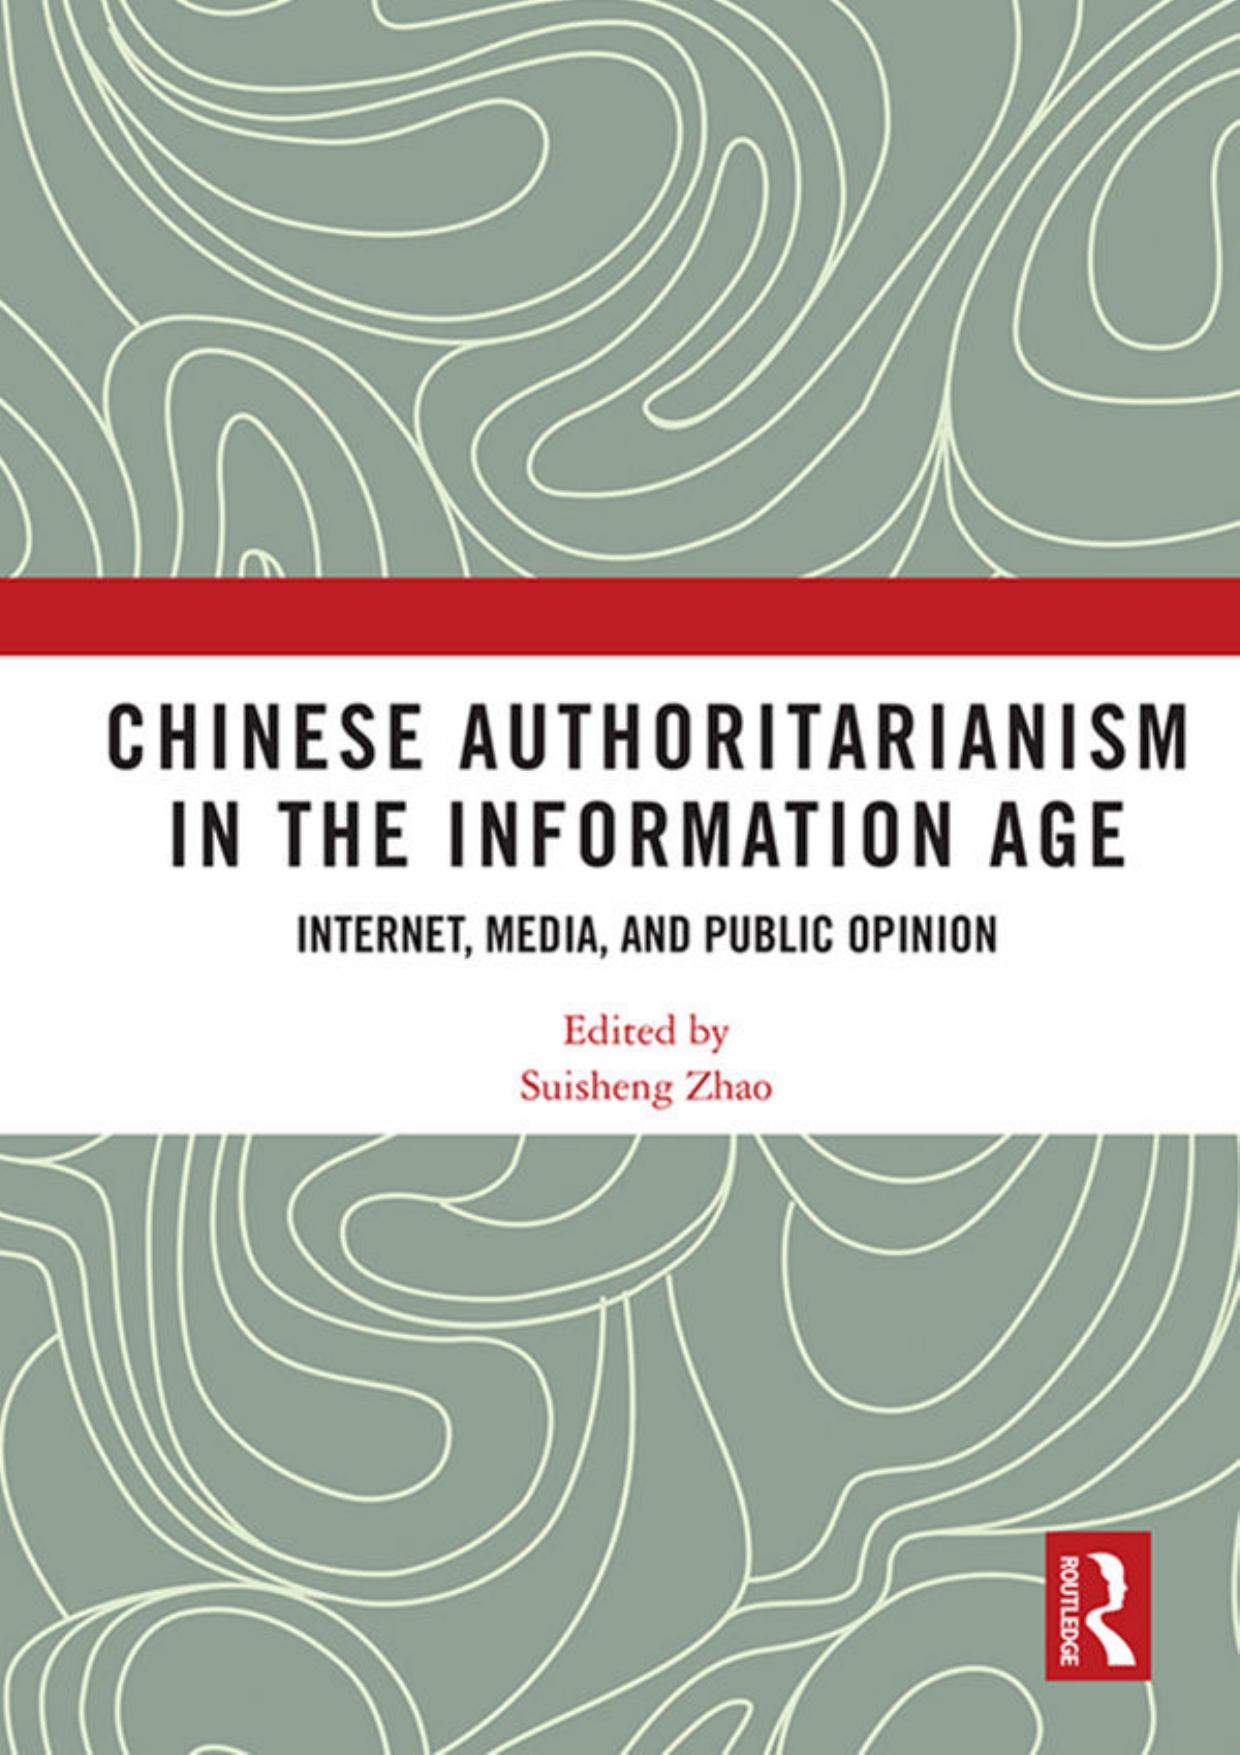 (eBook PDF)Chinese Authoritarianism in the Information Age: Internet, Media, and Public Opinion by Suisheng Zhao